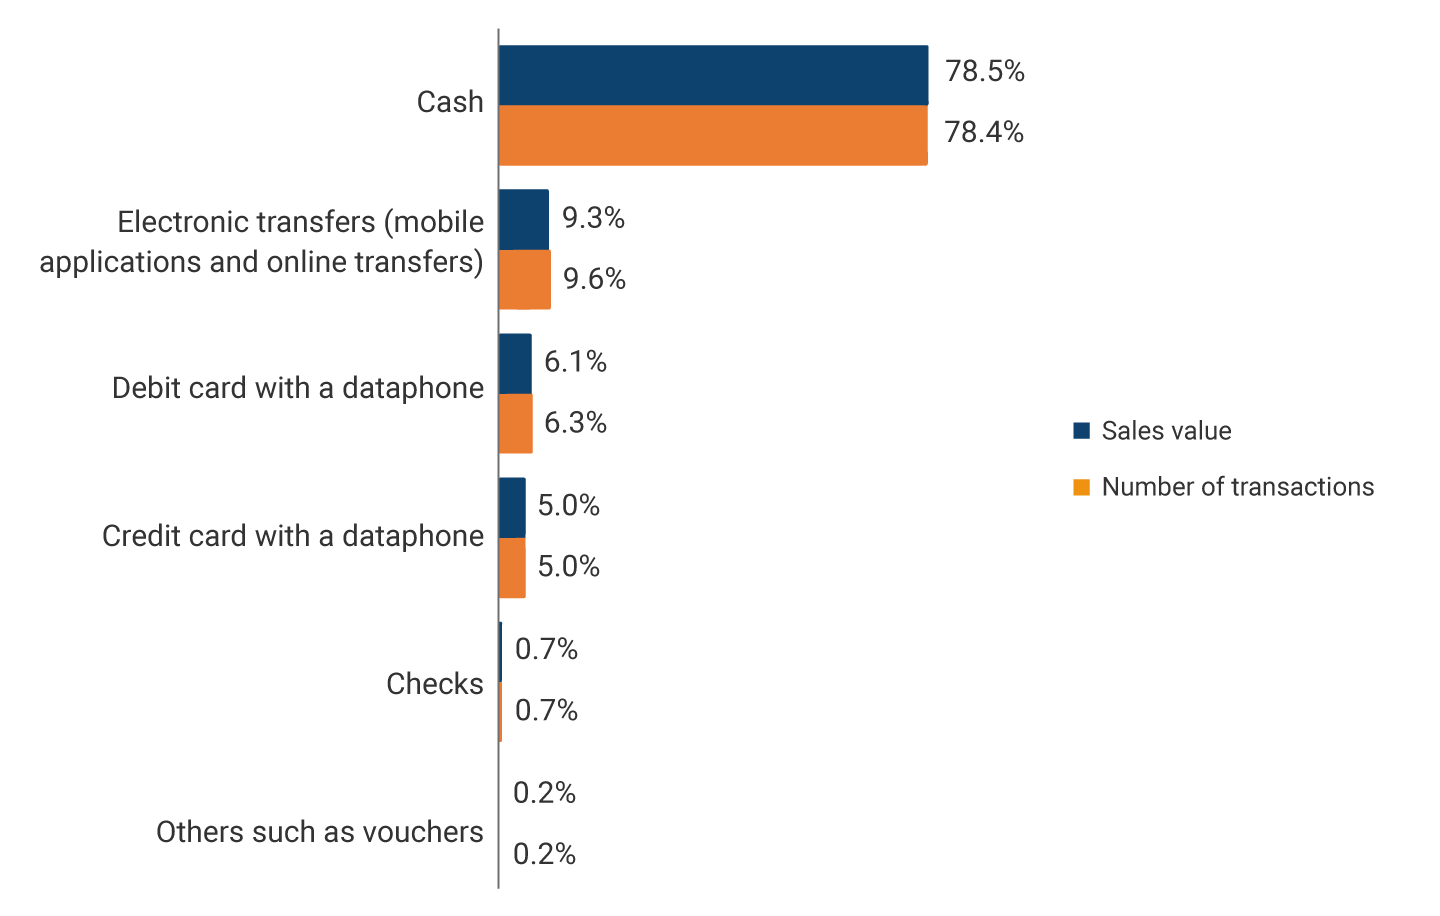 Cash: value of sales, 78.5%; number of transactions, 78.4%. Electronic transfers (mobile applications and online transfers): value of sales, 9.3%; number of transactions, 9.6%. Debit card with dataphone: value of sales, 6.1%; number of transactions, 6.3%. Credit card with dataphone: value of sales, 5.0%; number of transactions, 5.0%. Checks: value of sales, 0.7%; number of transactions, 0.7%. Others, such as bonds: value of sales, 0.2%; number of transactions, 0.2%.